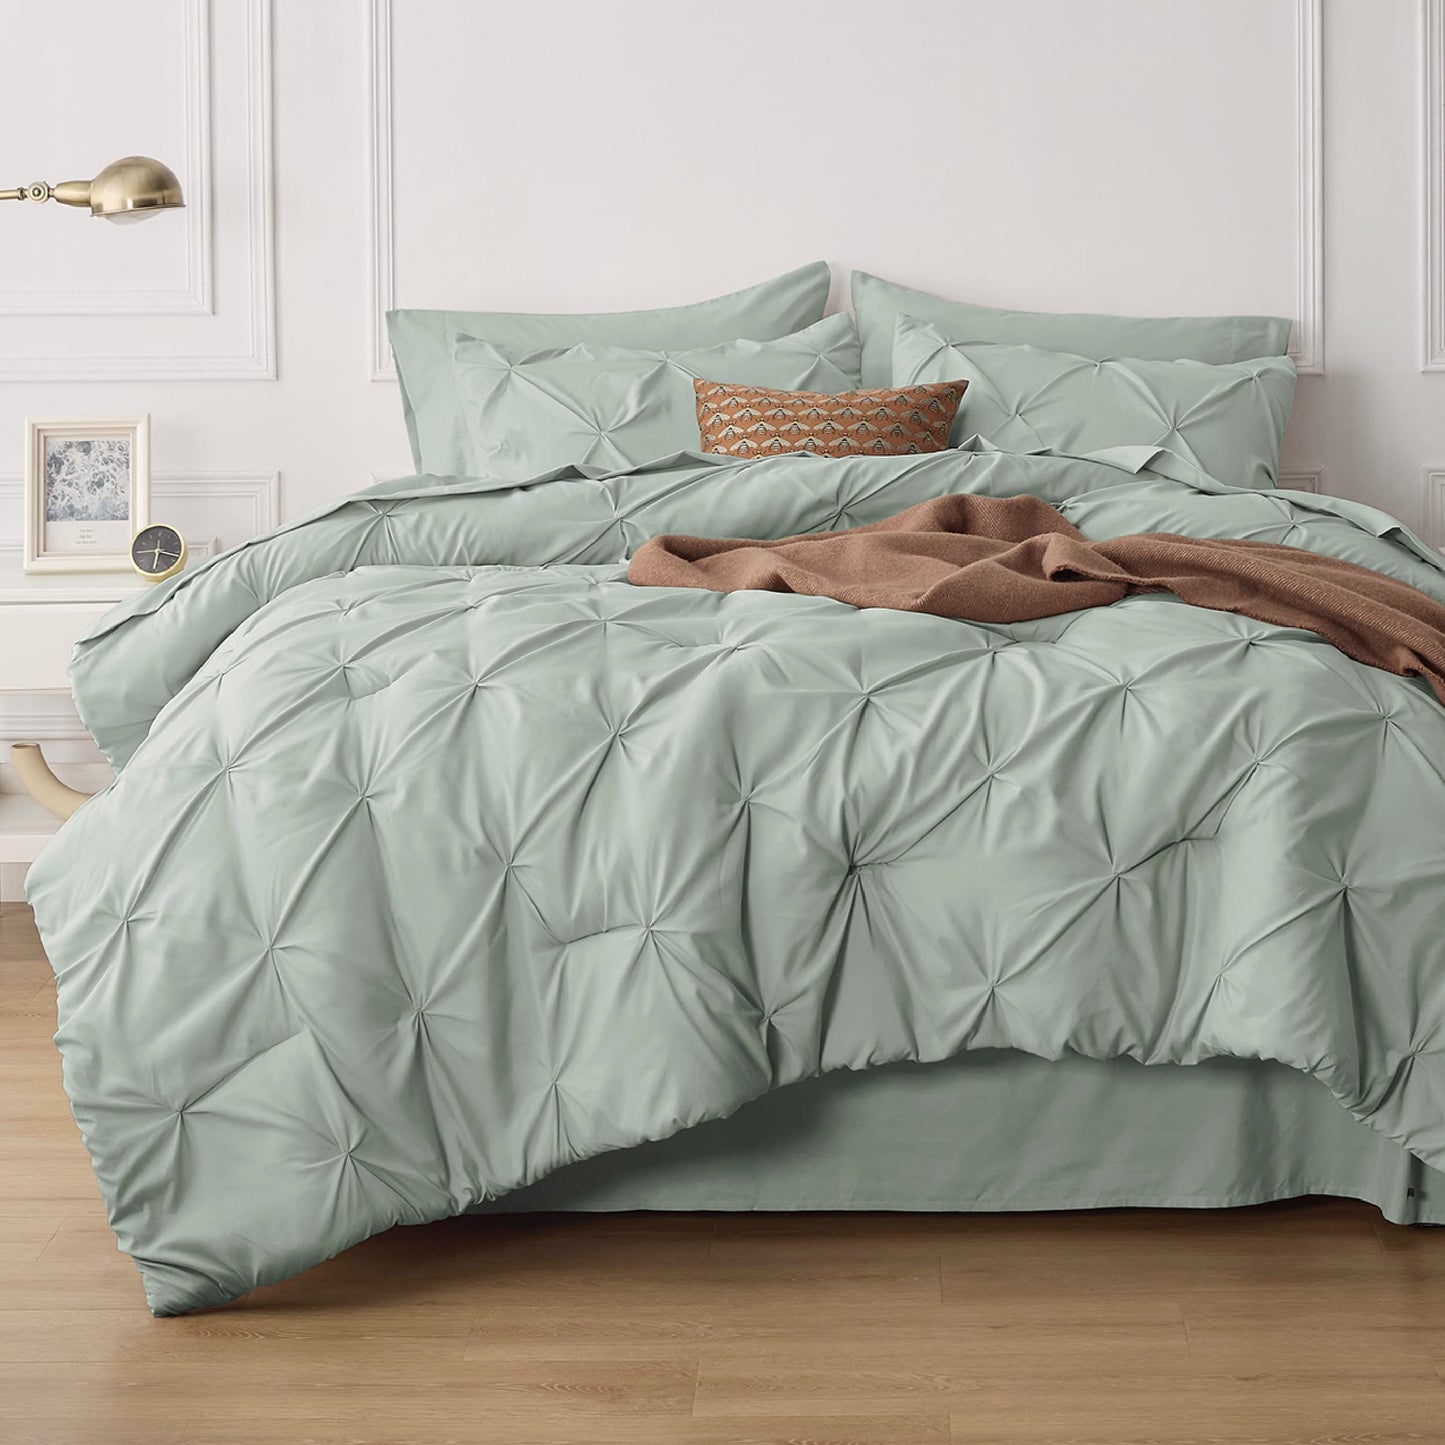 Bedsure Twin XL Comforter Set Sage Green - 5 Pieces Bedding Sets, Pinch Pleat Bed in a Bag with Comforter, Sheets, Pillowcase & Sham